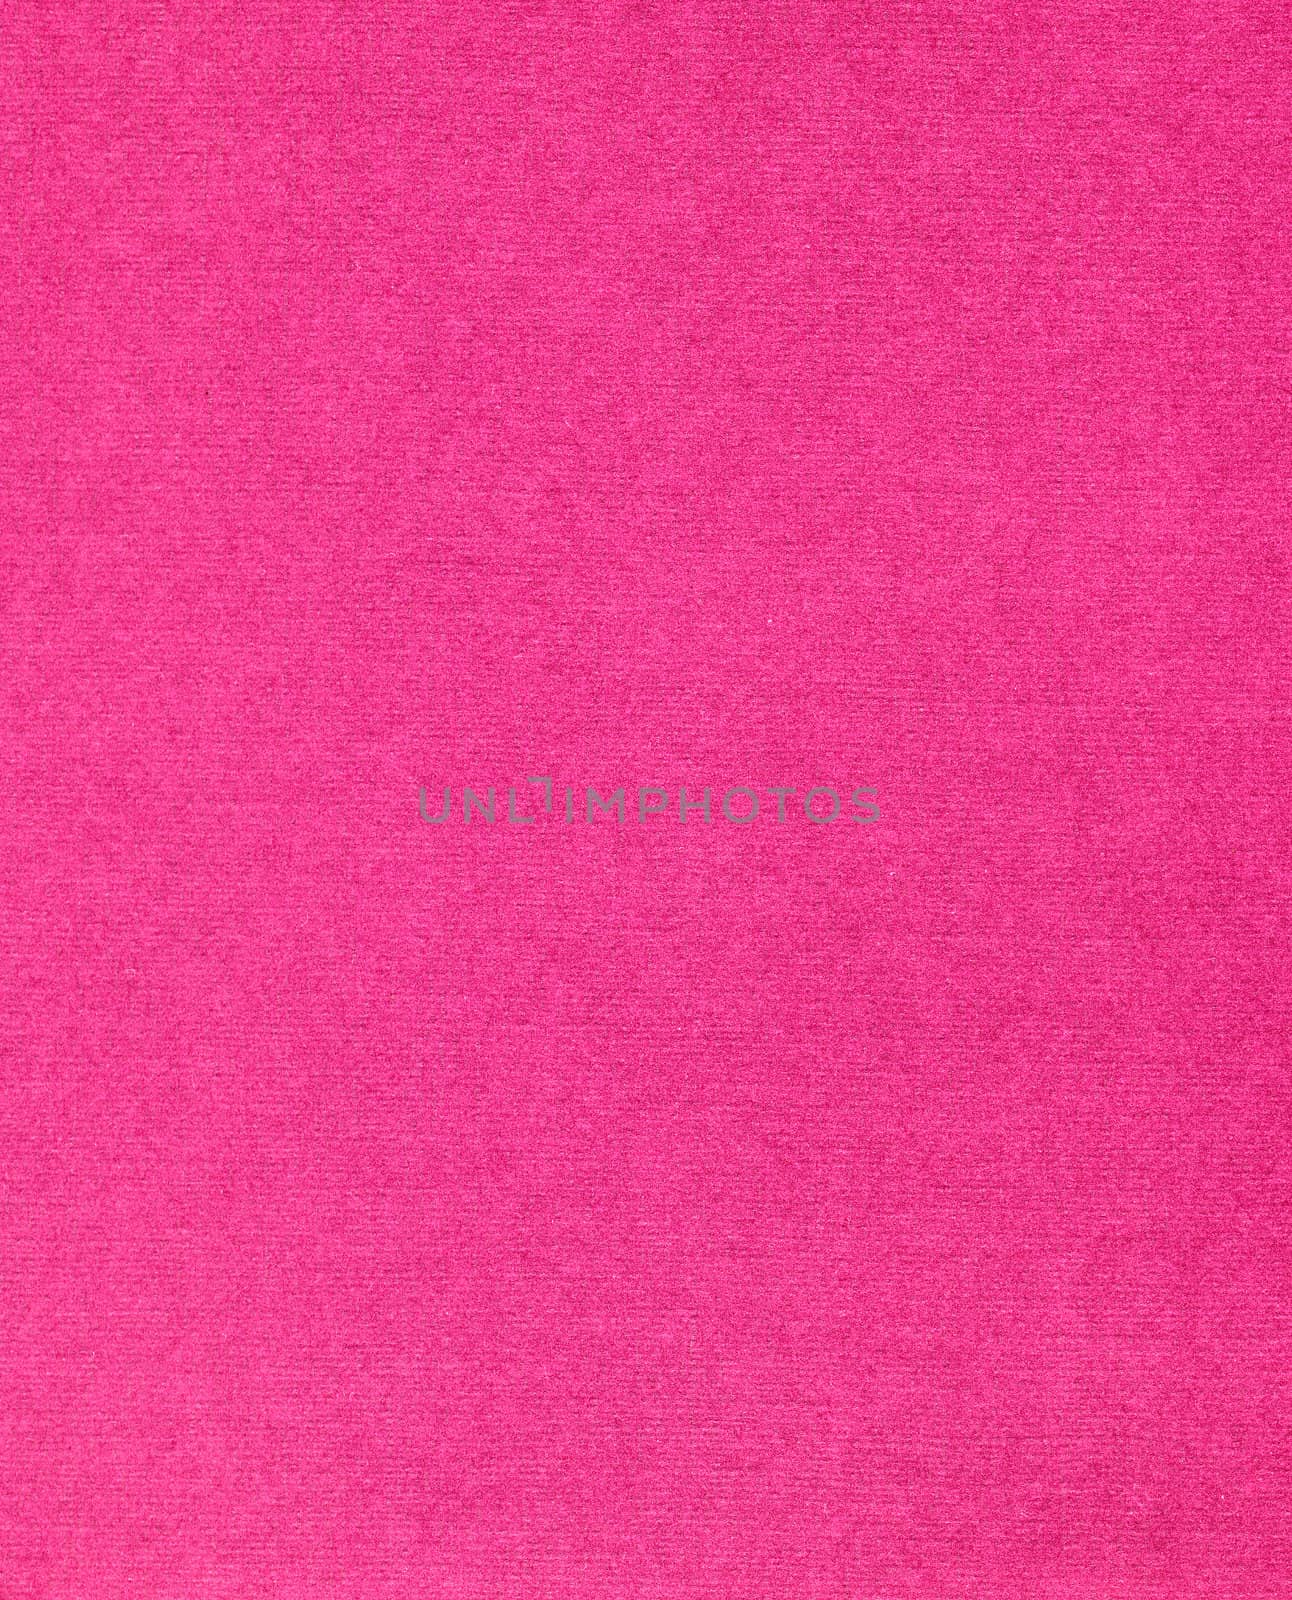 Pink paper useful as a background